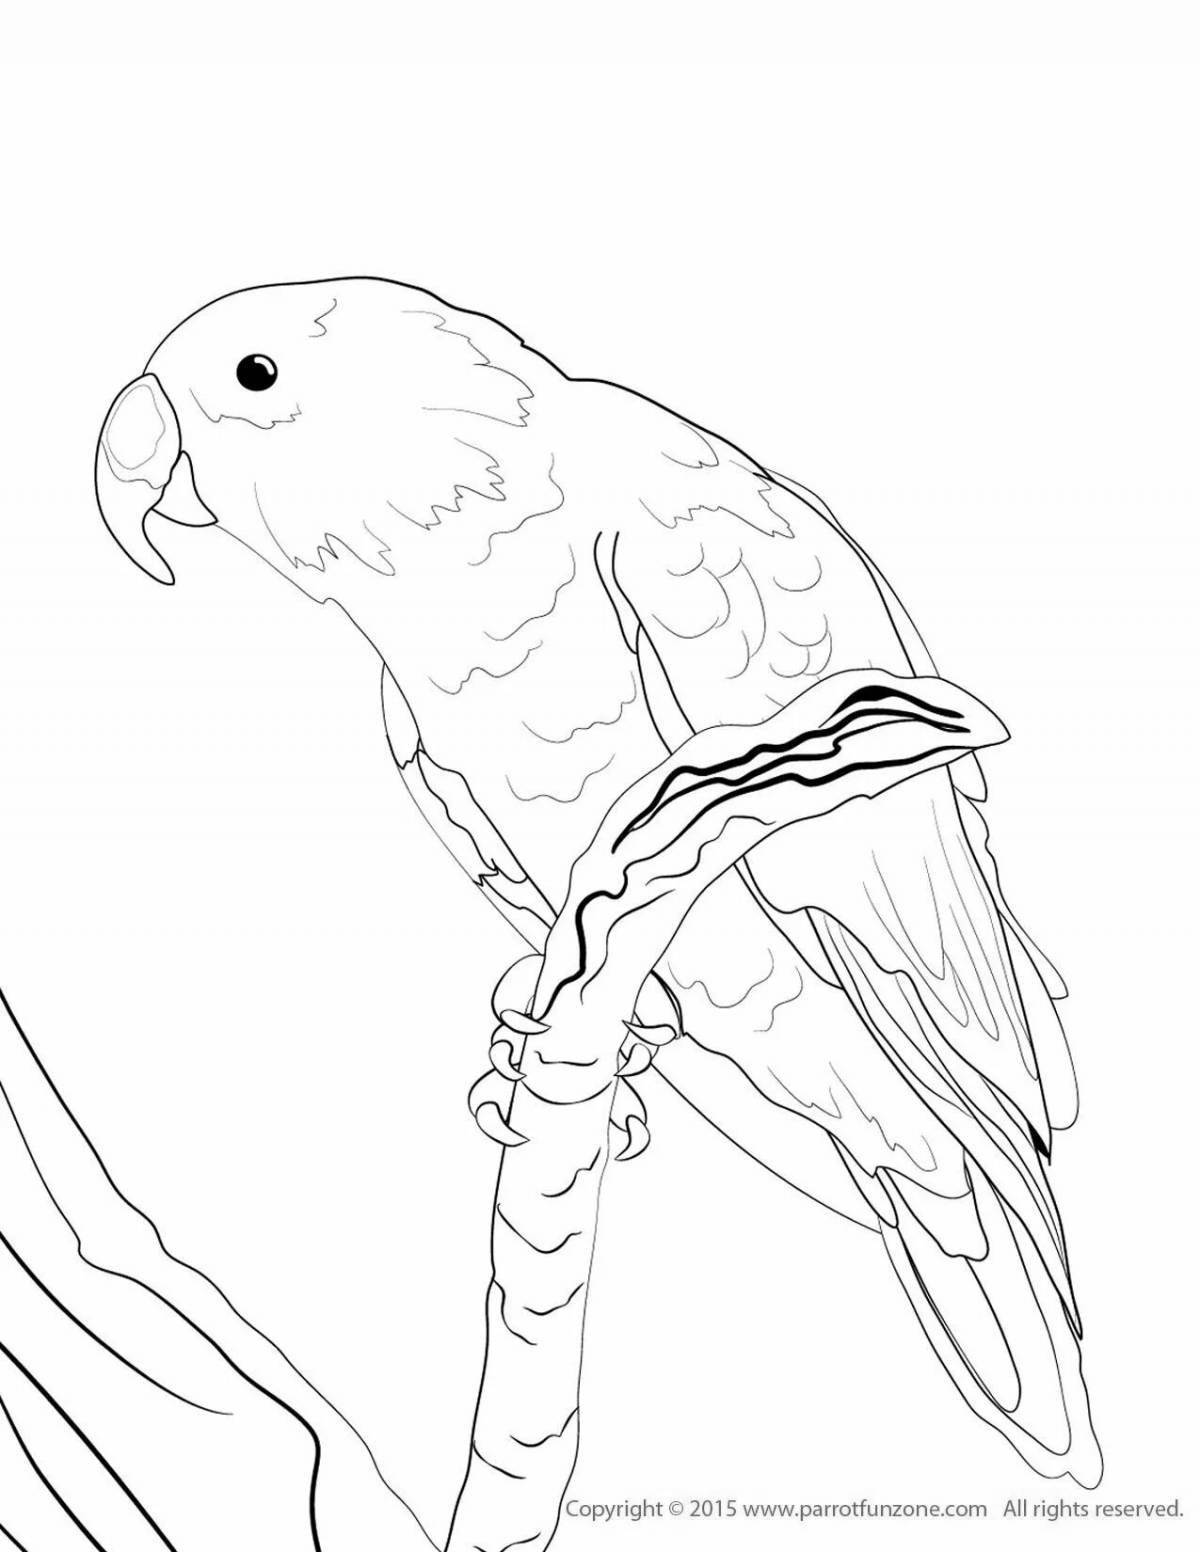 Sparkly decorated blue macaw coloring page